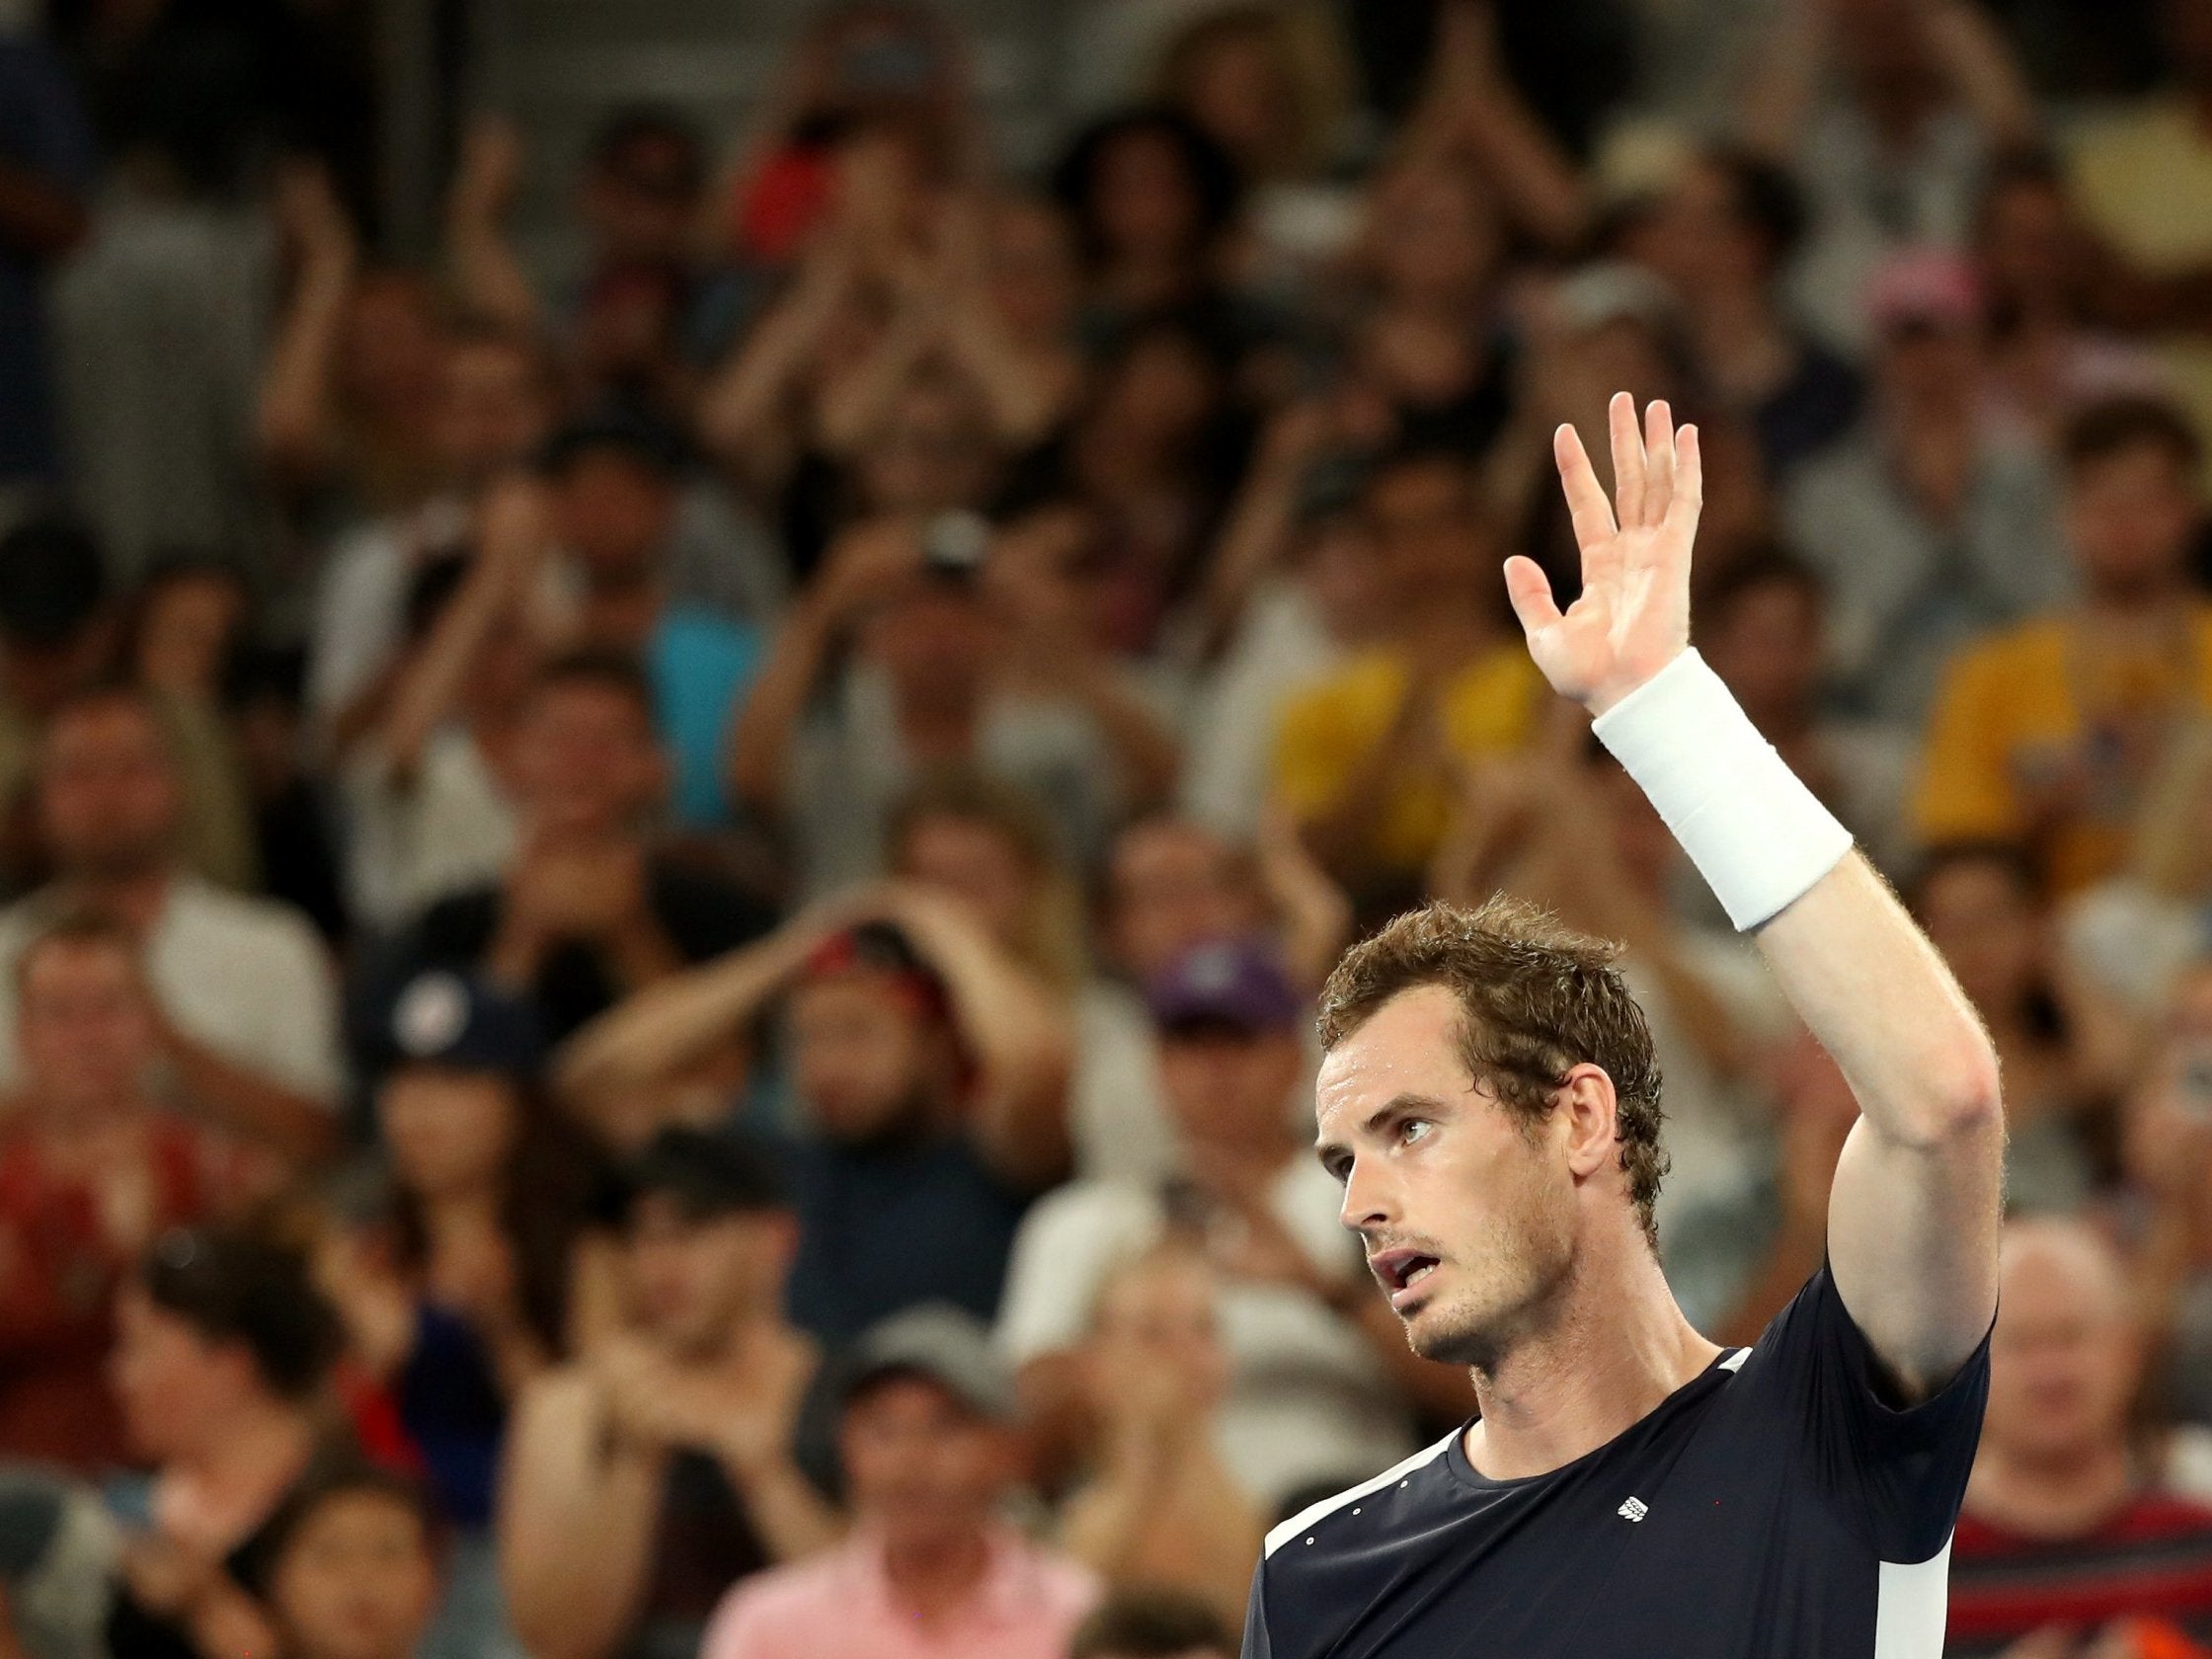 Murray bows out of the Australian Open after losing his first-round match against Roberto Bautista Agut last week